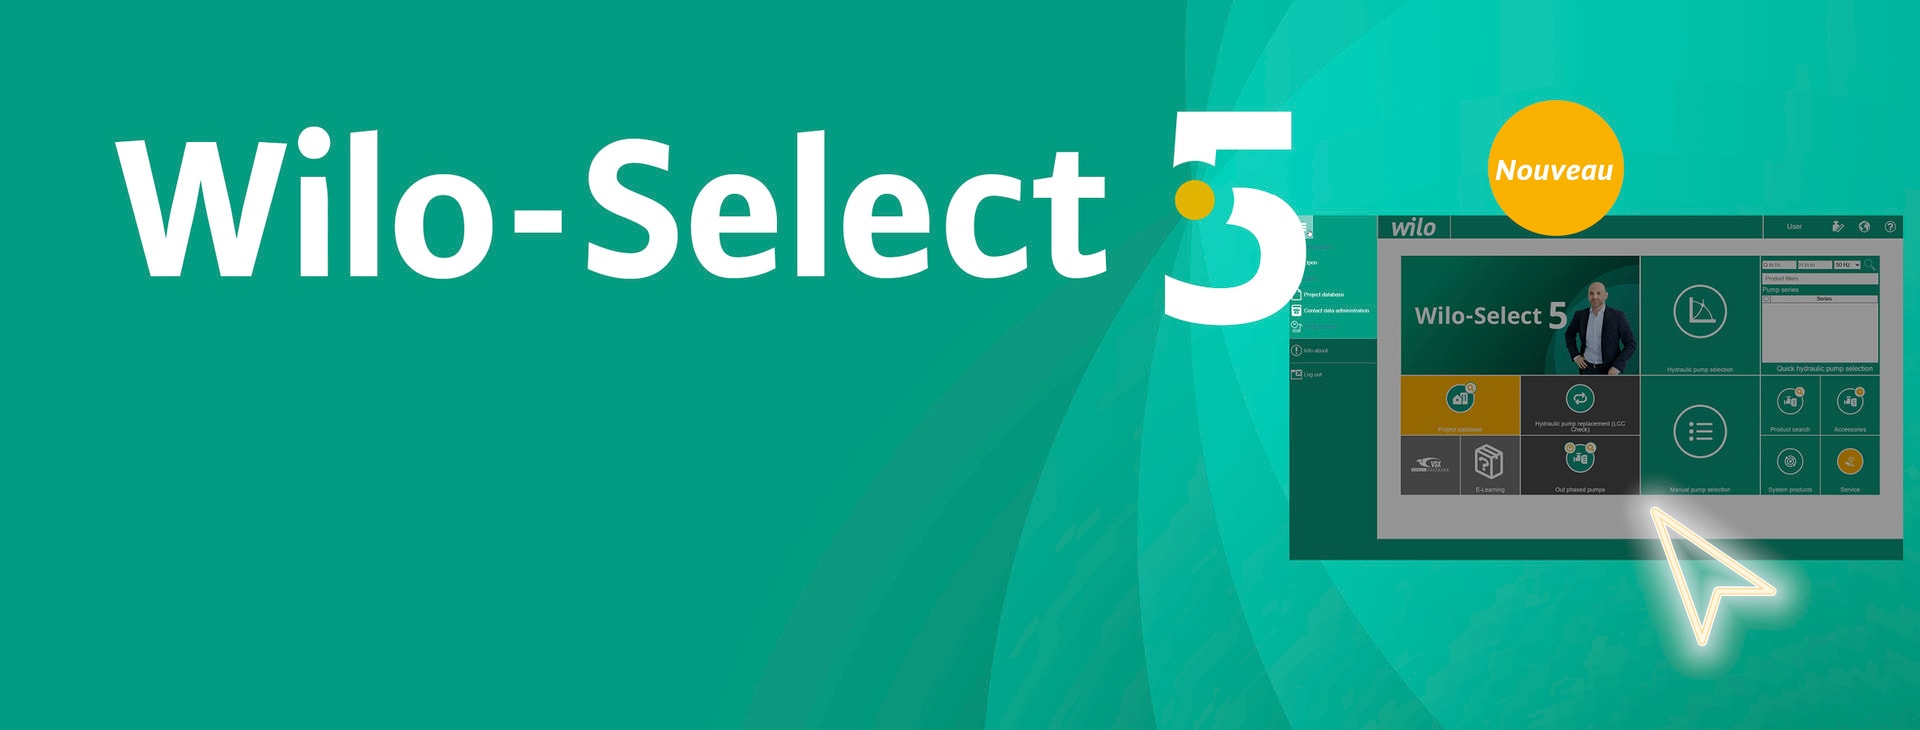 Wilo-Select 5 online